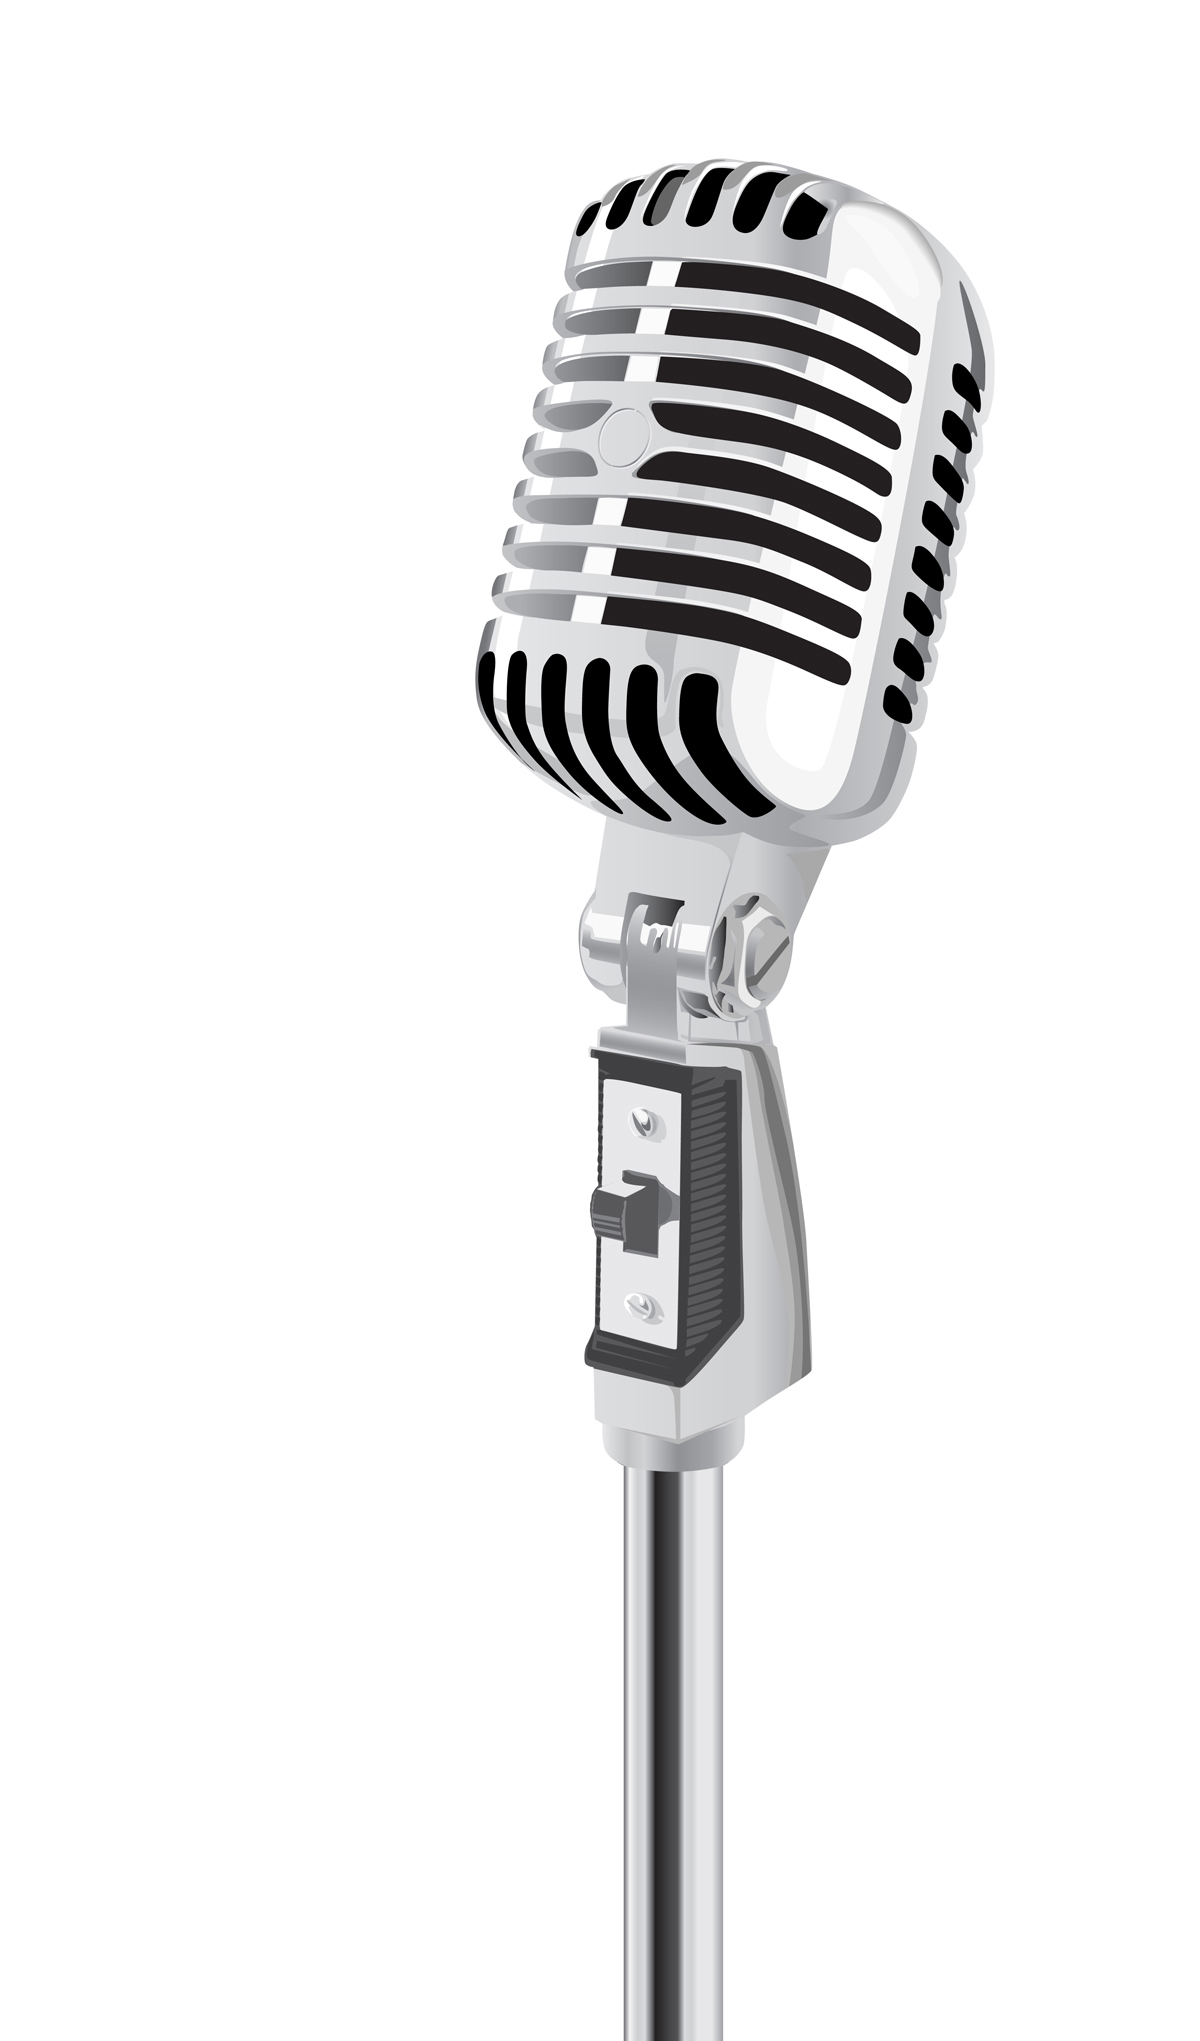 Microphone Clipart Black And White Microphone Black And White